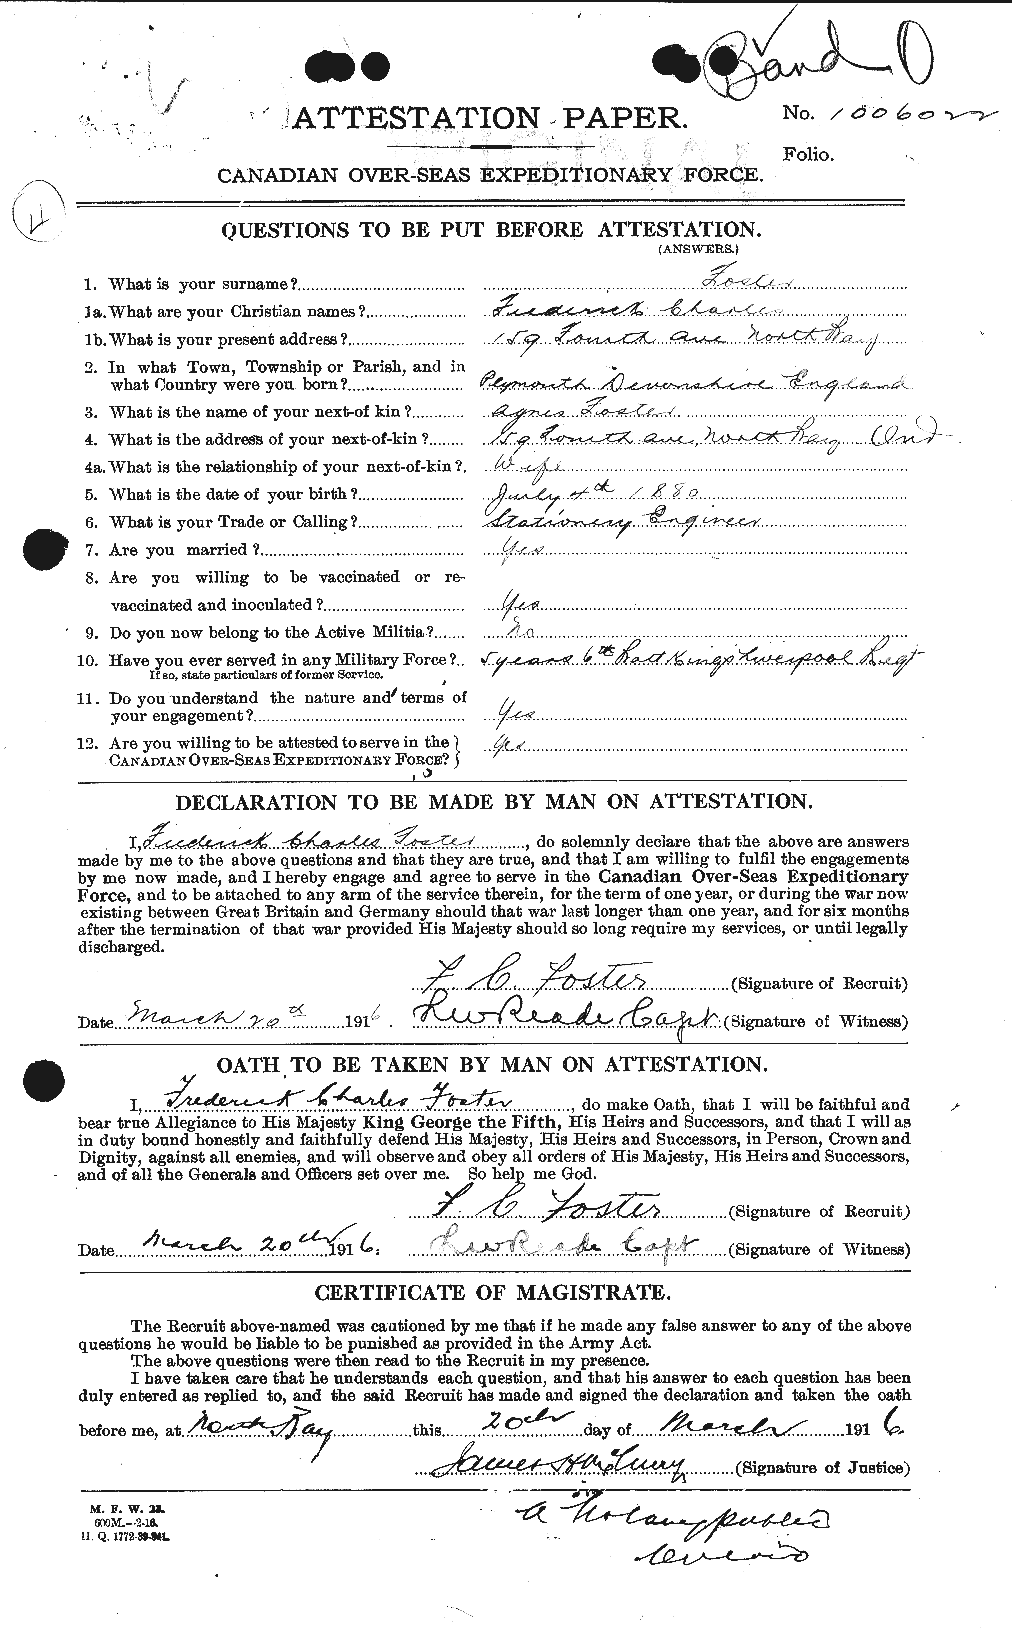 Personnel Records of the First World War - CEF 330648a